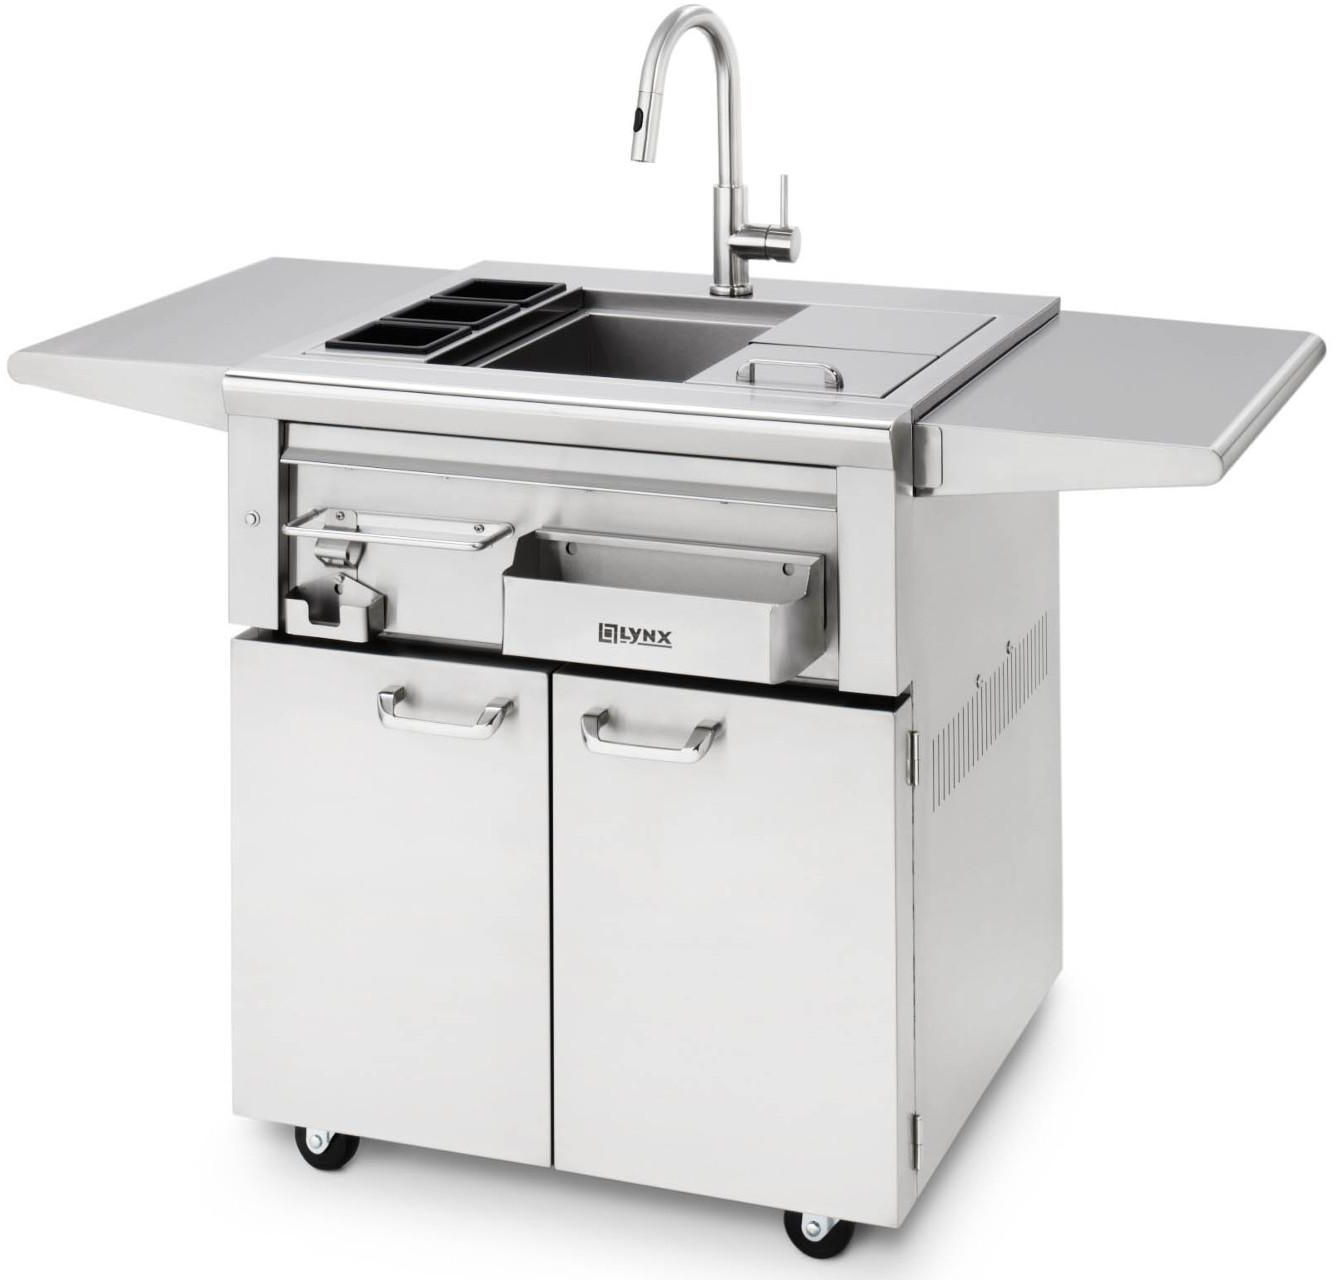 Lynx® Professional 30” Freestanding Cocktail Pro-Stainless Steel